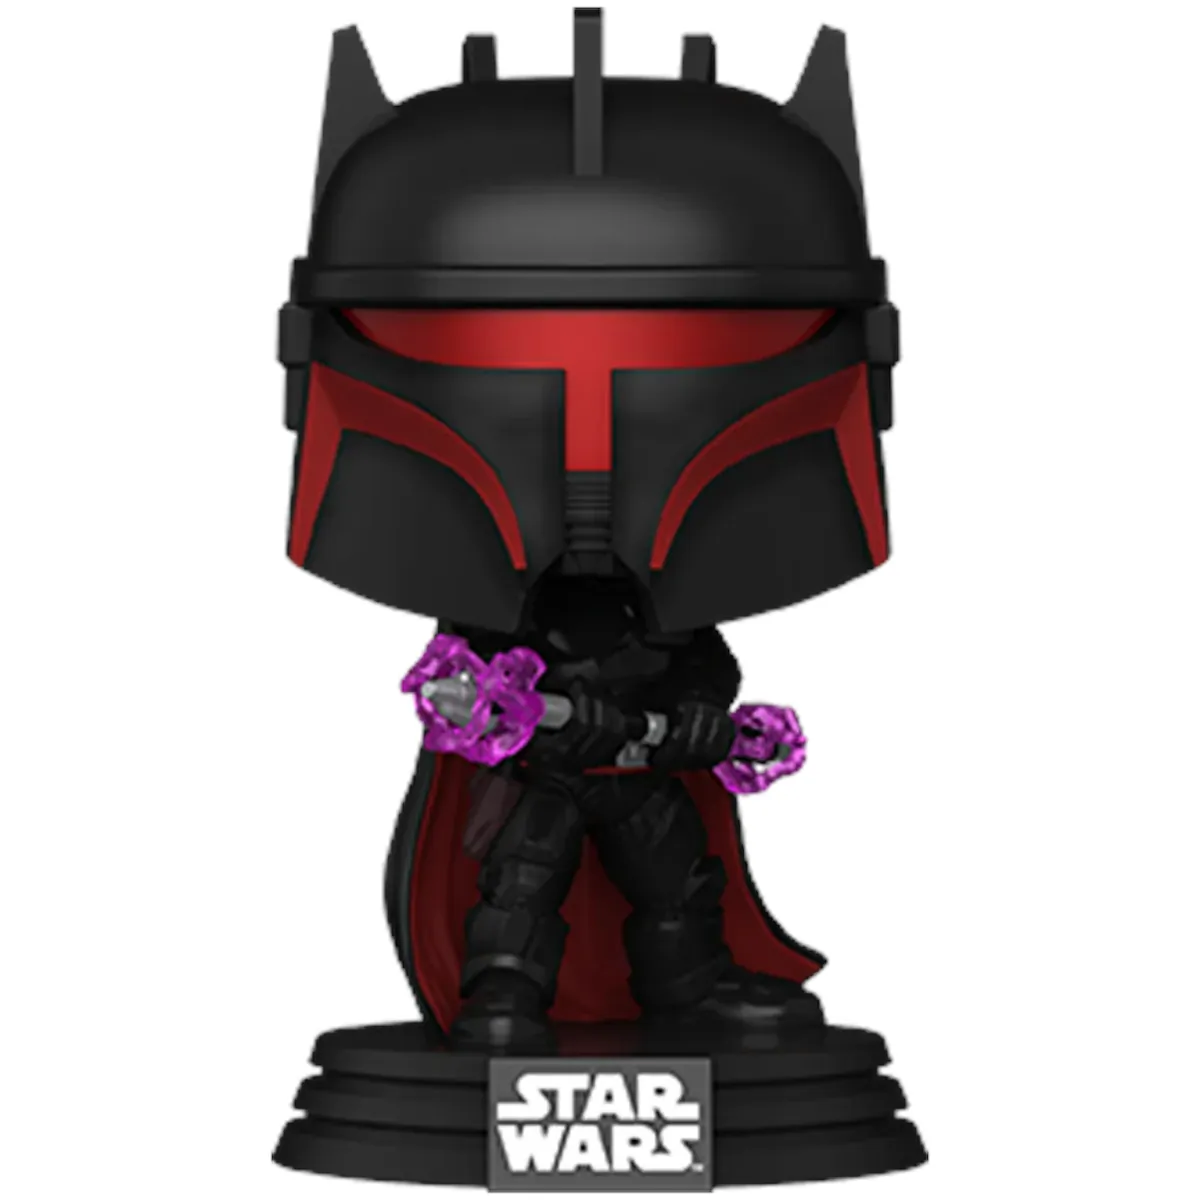 80005 Funko Pop! Television - Star Wars The Mandalorian - Moff Gideon with Armor Collectable Vinyl Figure